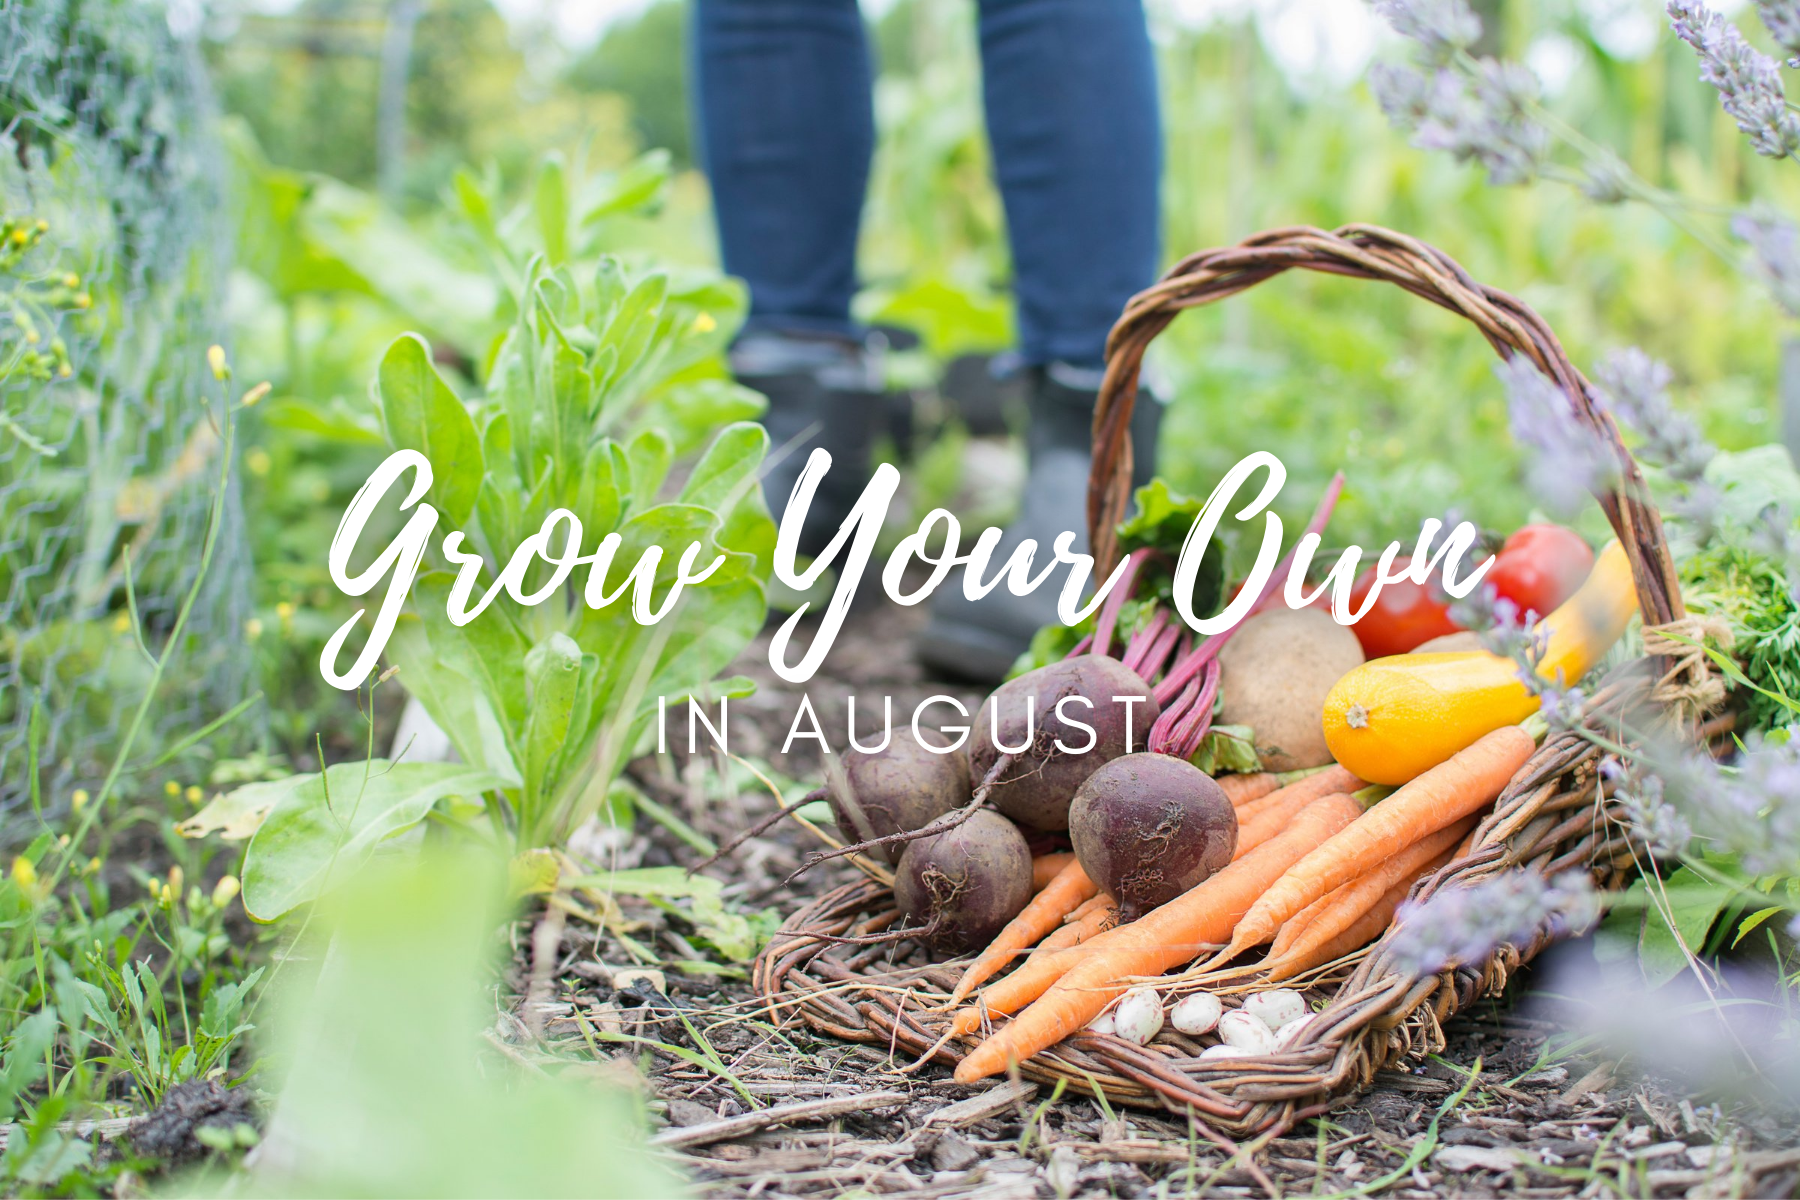 Grow Your Own in August